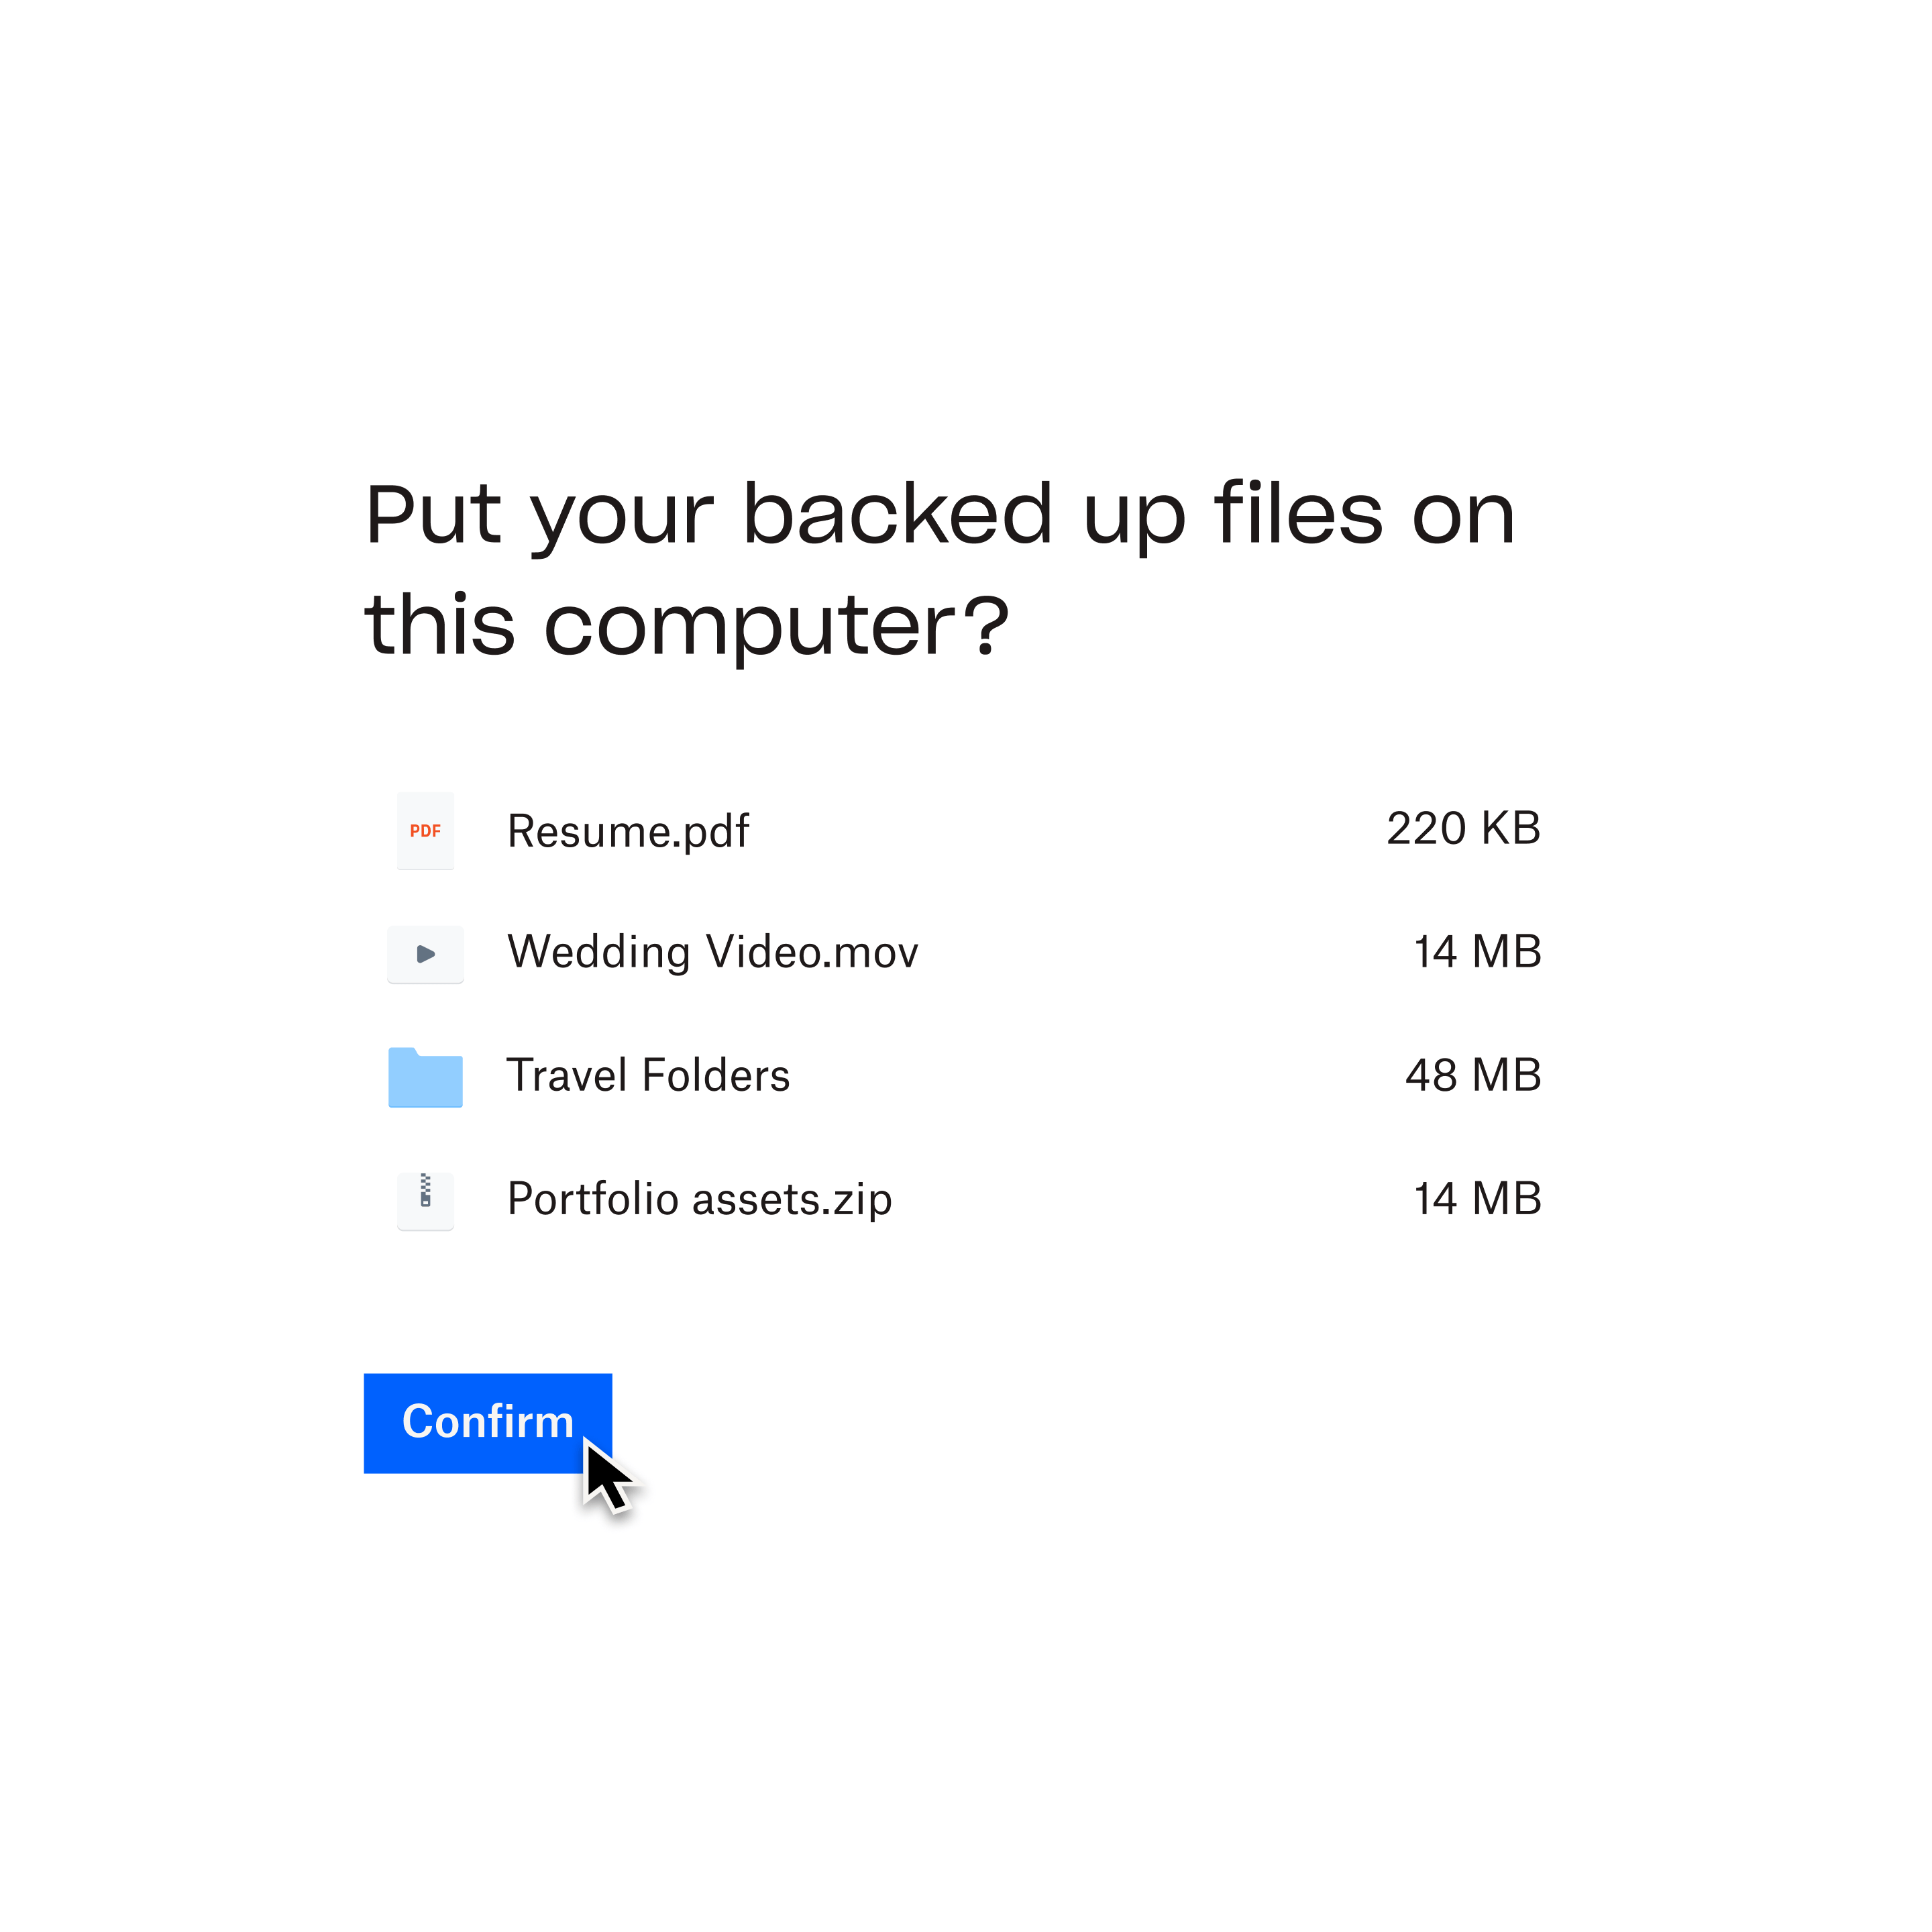 A prompt message from Dropbox Backup, asking if you would like to put your backed up files on the selected computer. A mouse cursor hovers over a button labelled “Confirm”.